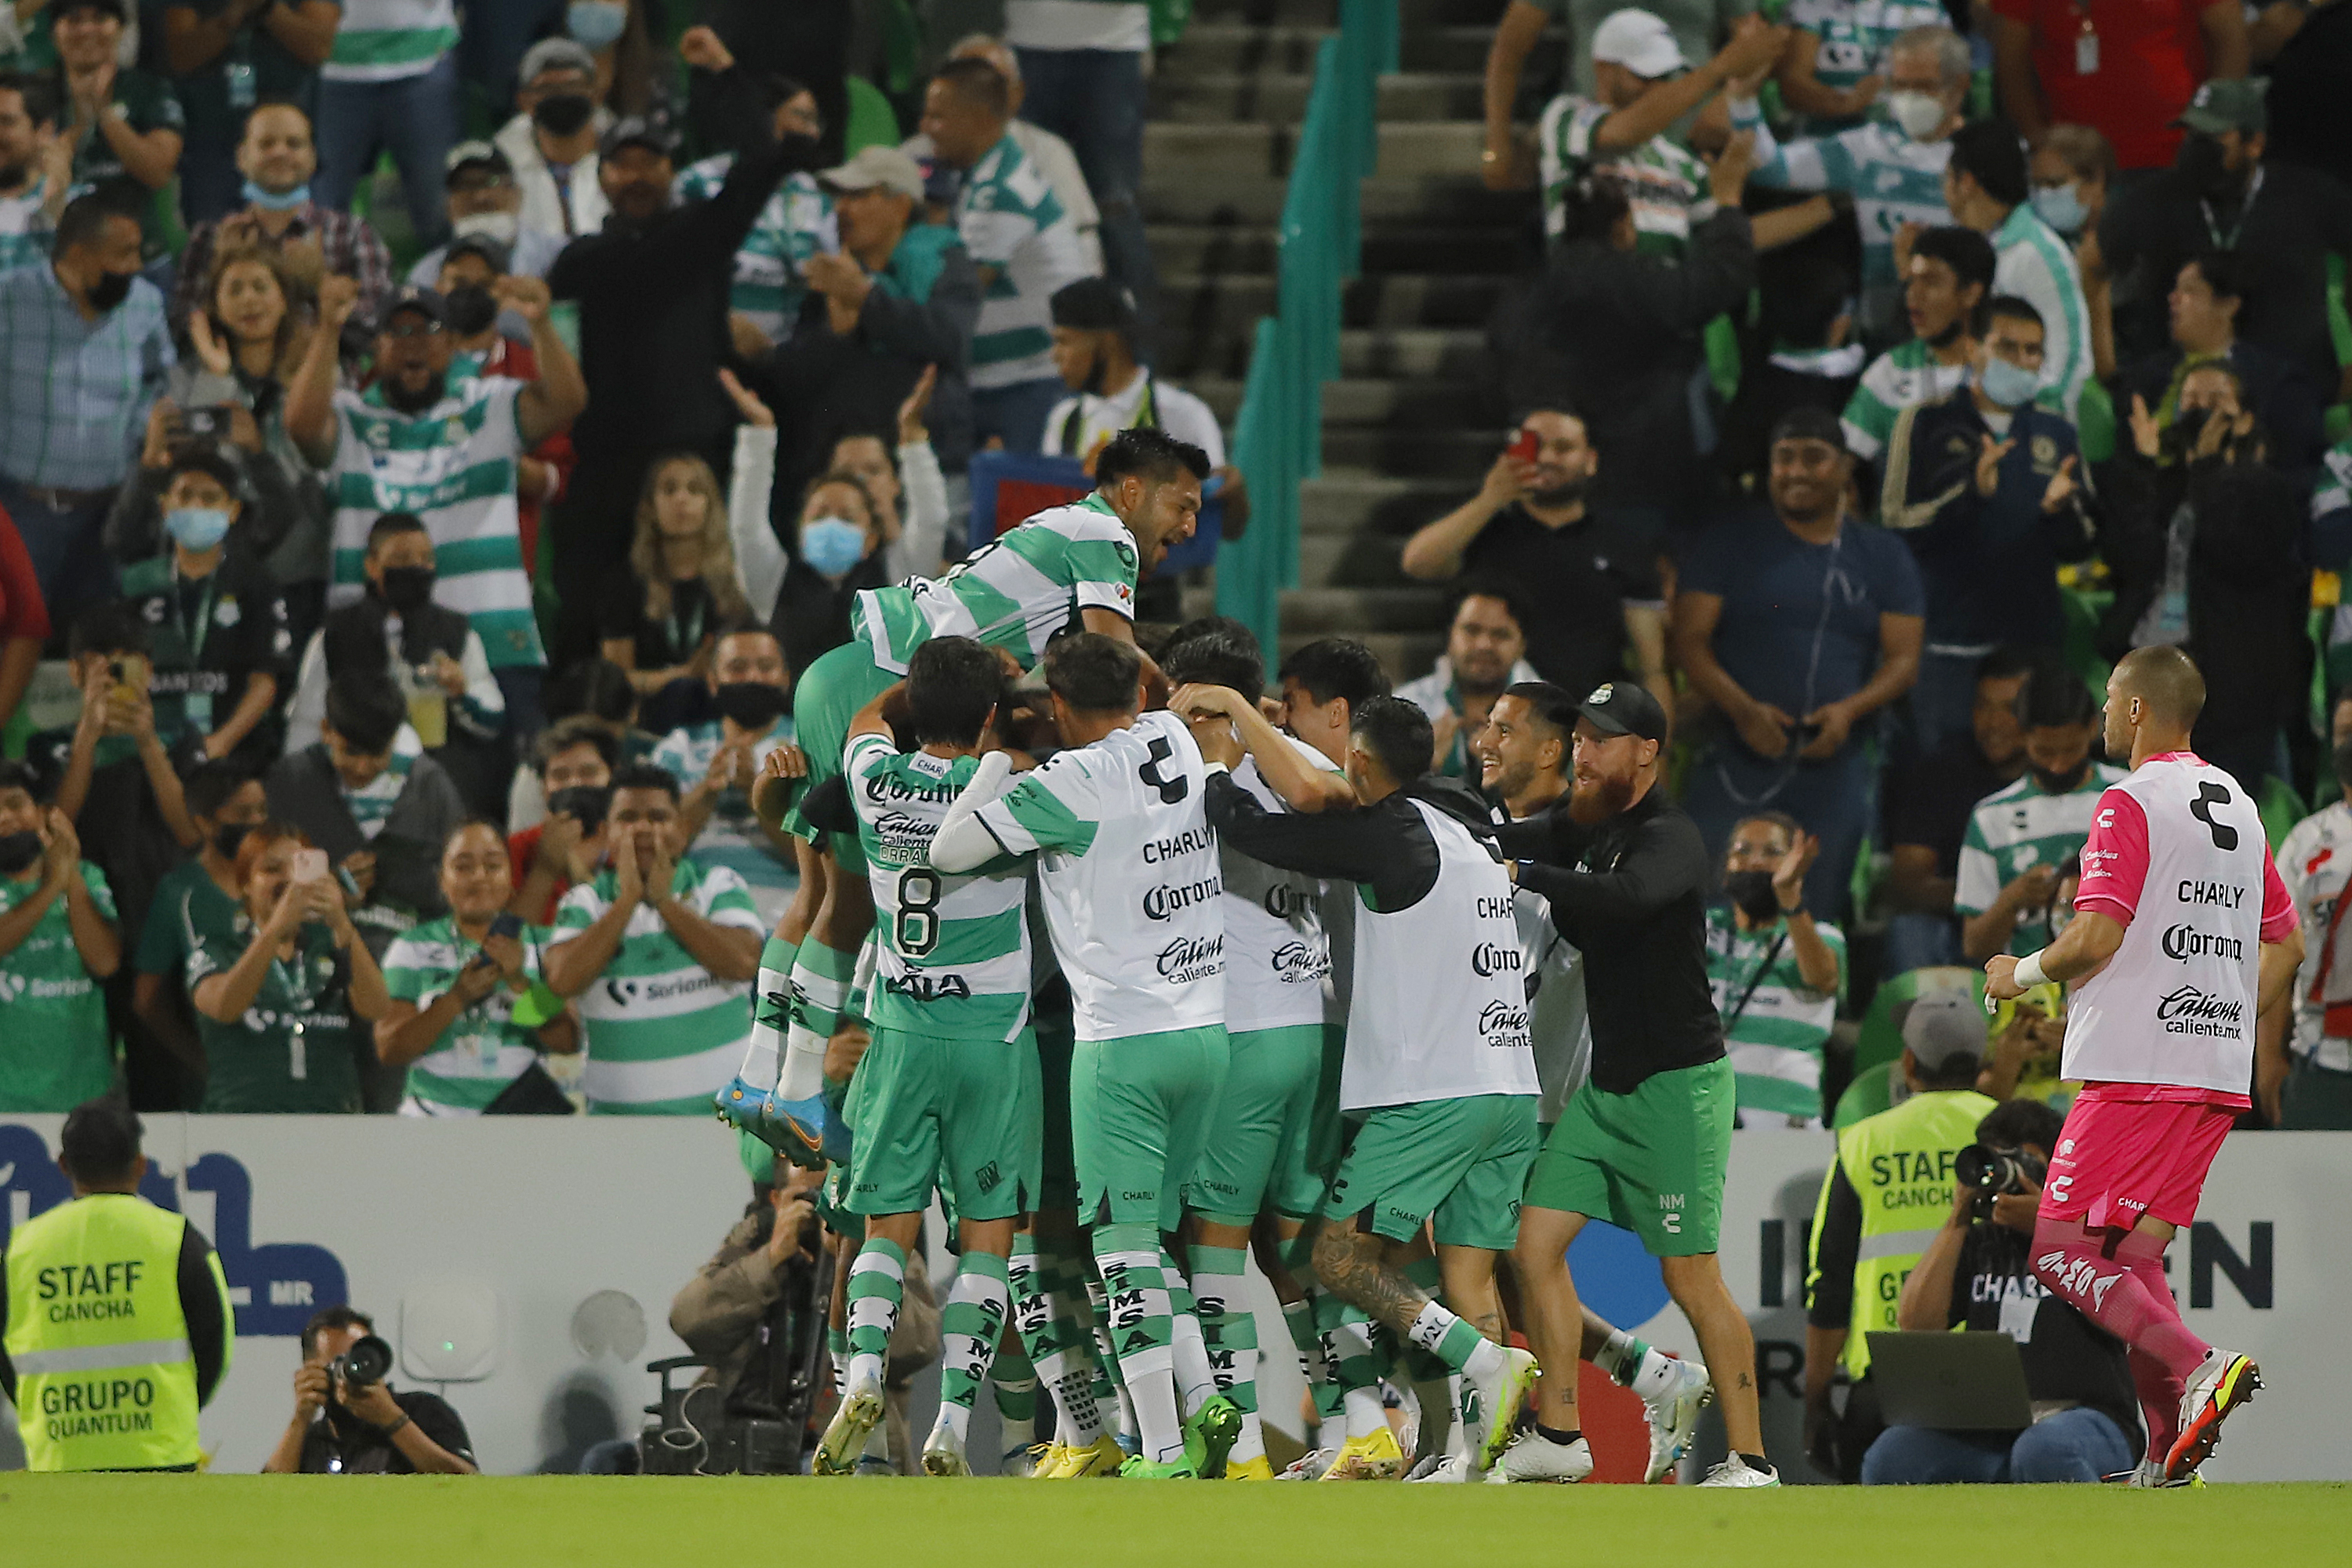 Diego Medina of Santos celebrates with teammates after scoring the second goal of his team during the 13th round match between Santos Laguna and Necaxa as part of the Torneo Apertura 2022 Liga MX at Corona Stadium on September 6, 2022 in Torreon, Mexico.